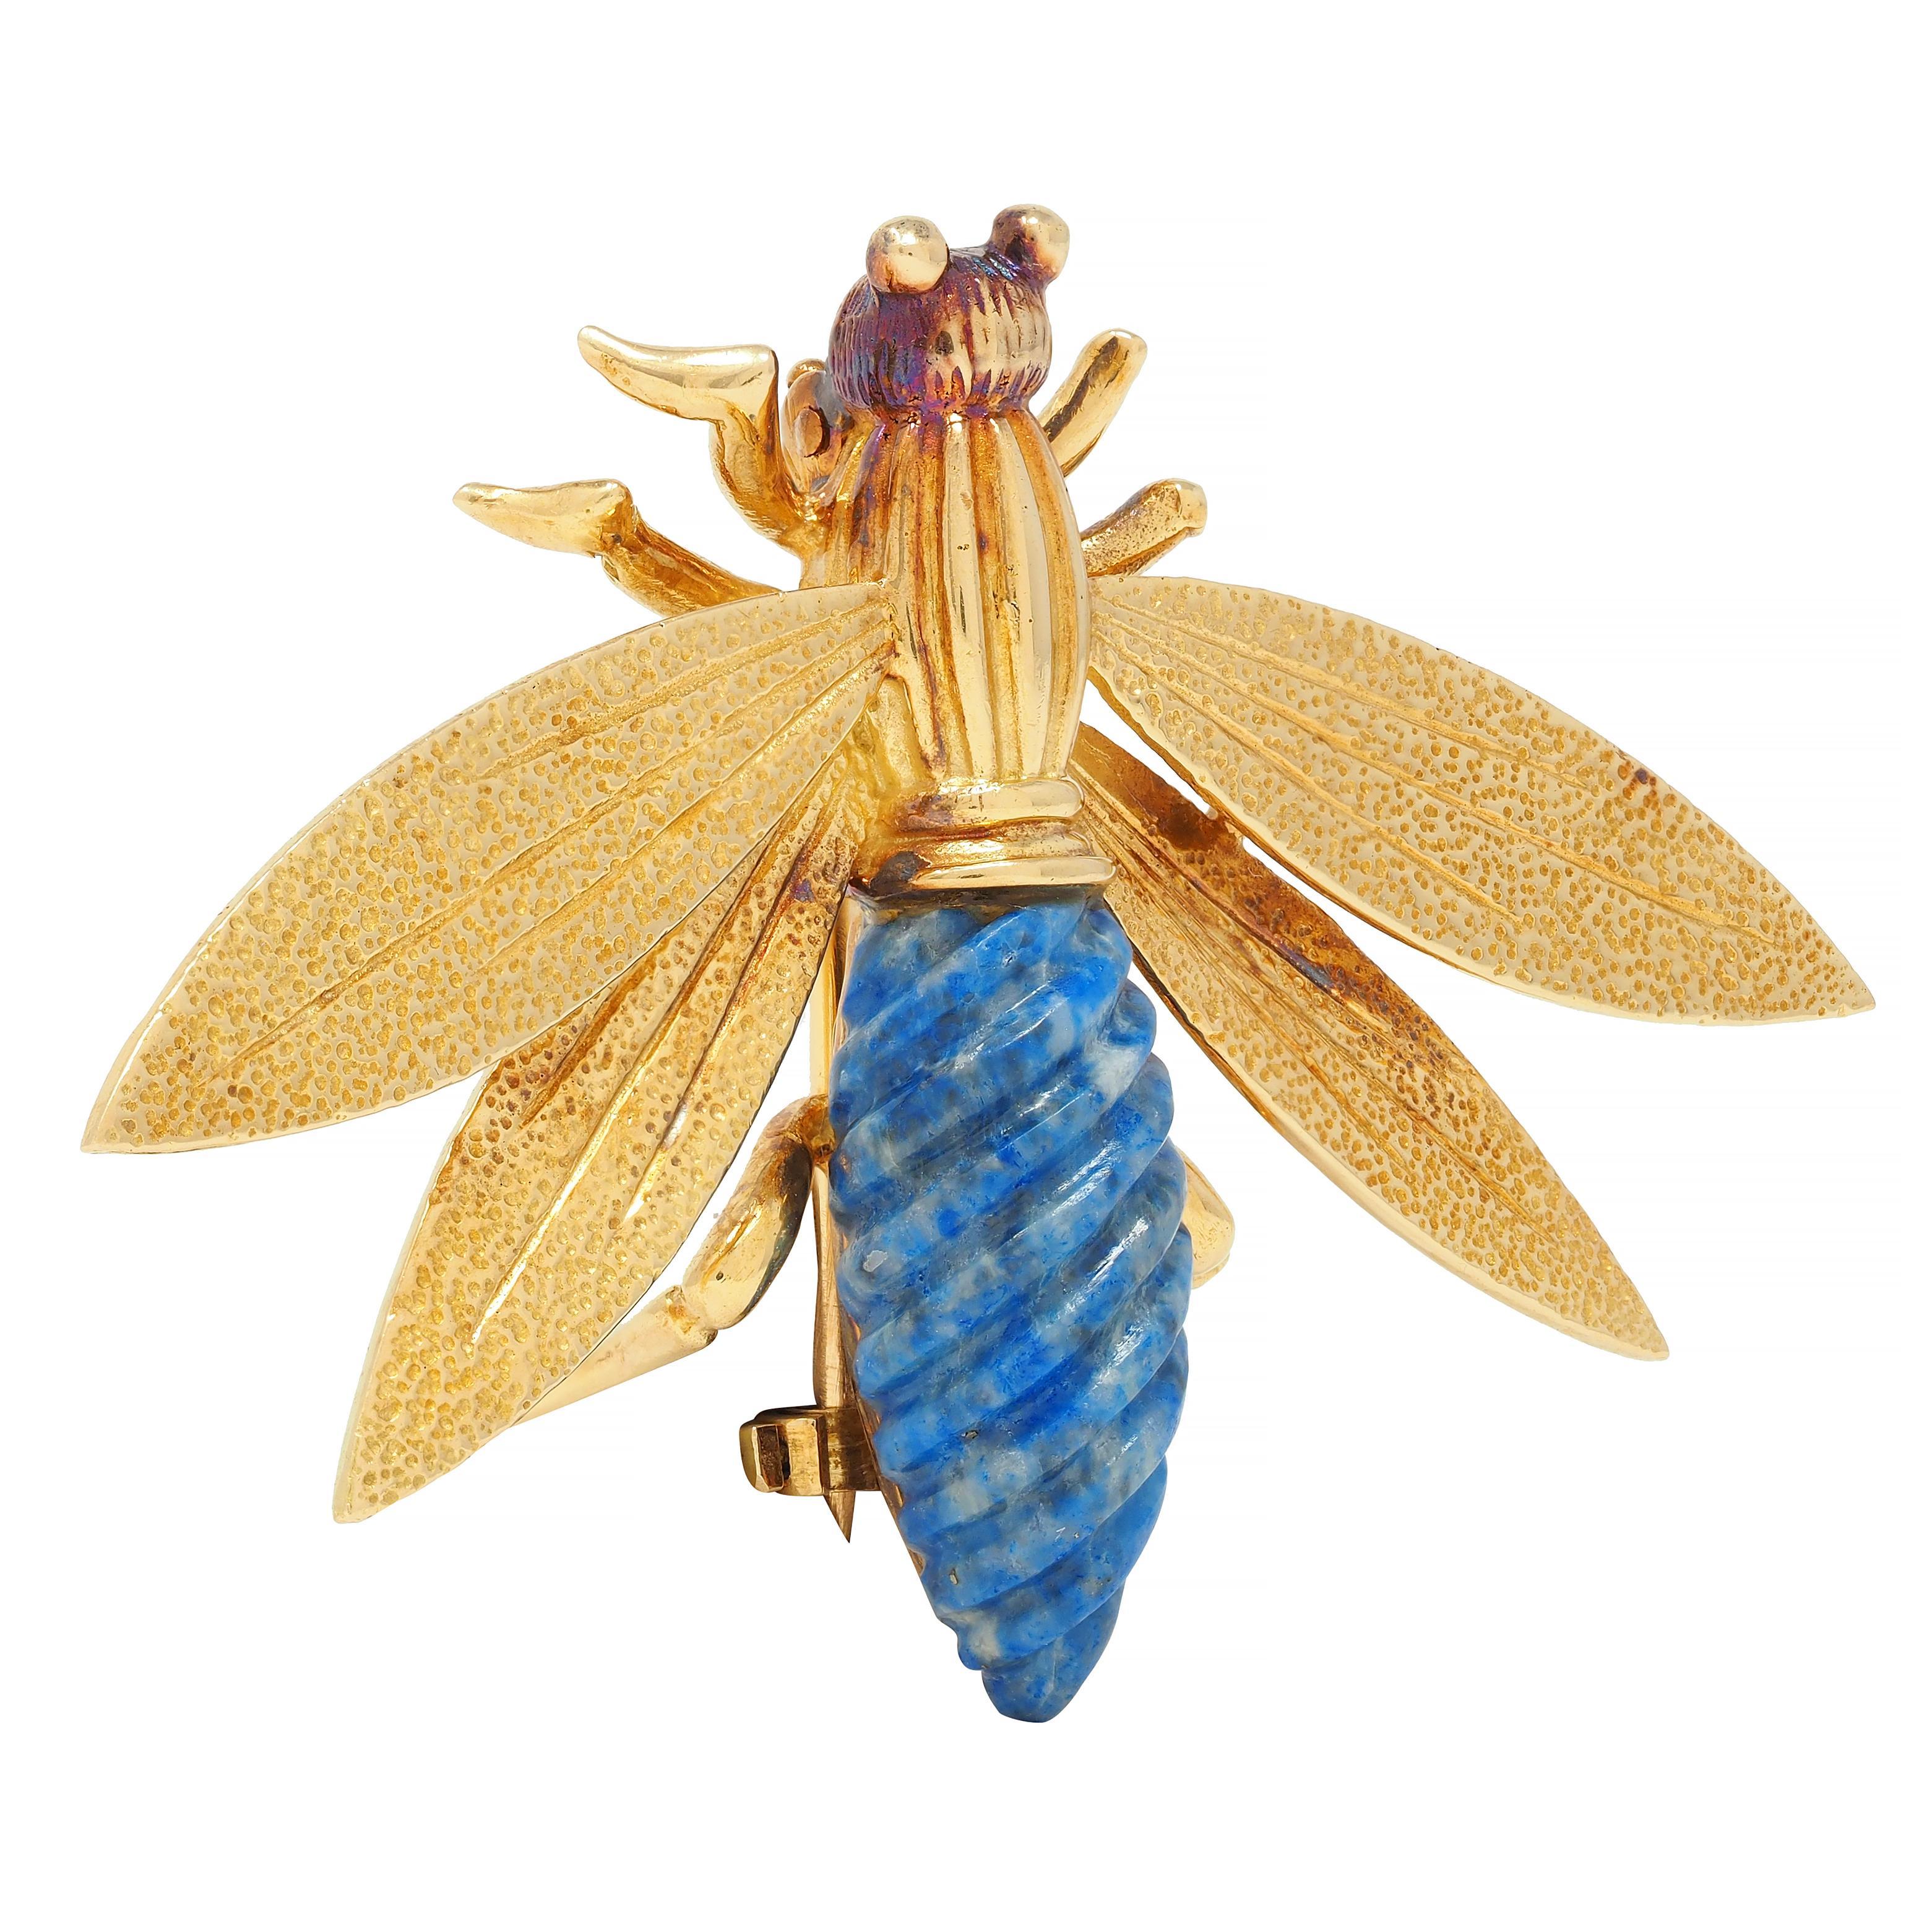 Designed as a stylized insect with four stipple textured wings and a fluted torso
Featuring a carved twist motif lapis lazuli lower body measuring 8.0 x 19.0 mm 
Medium ultramarine blue with gray mottling and pyrite flecking
Accented by beaded eyes